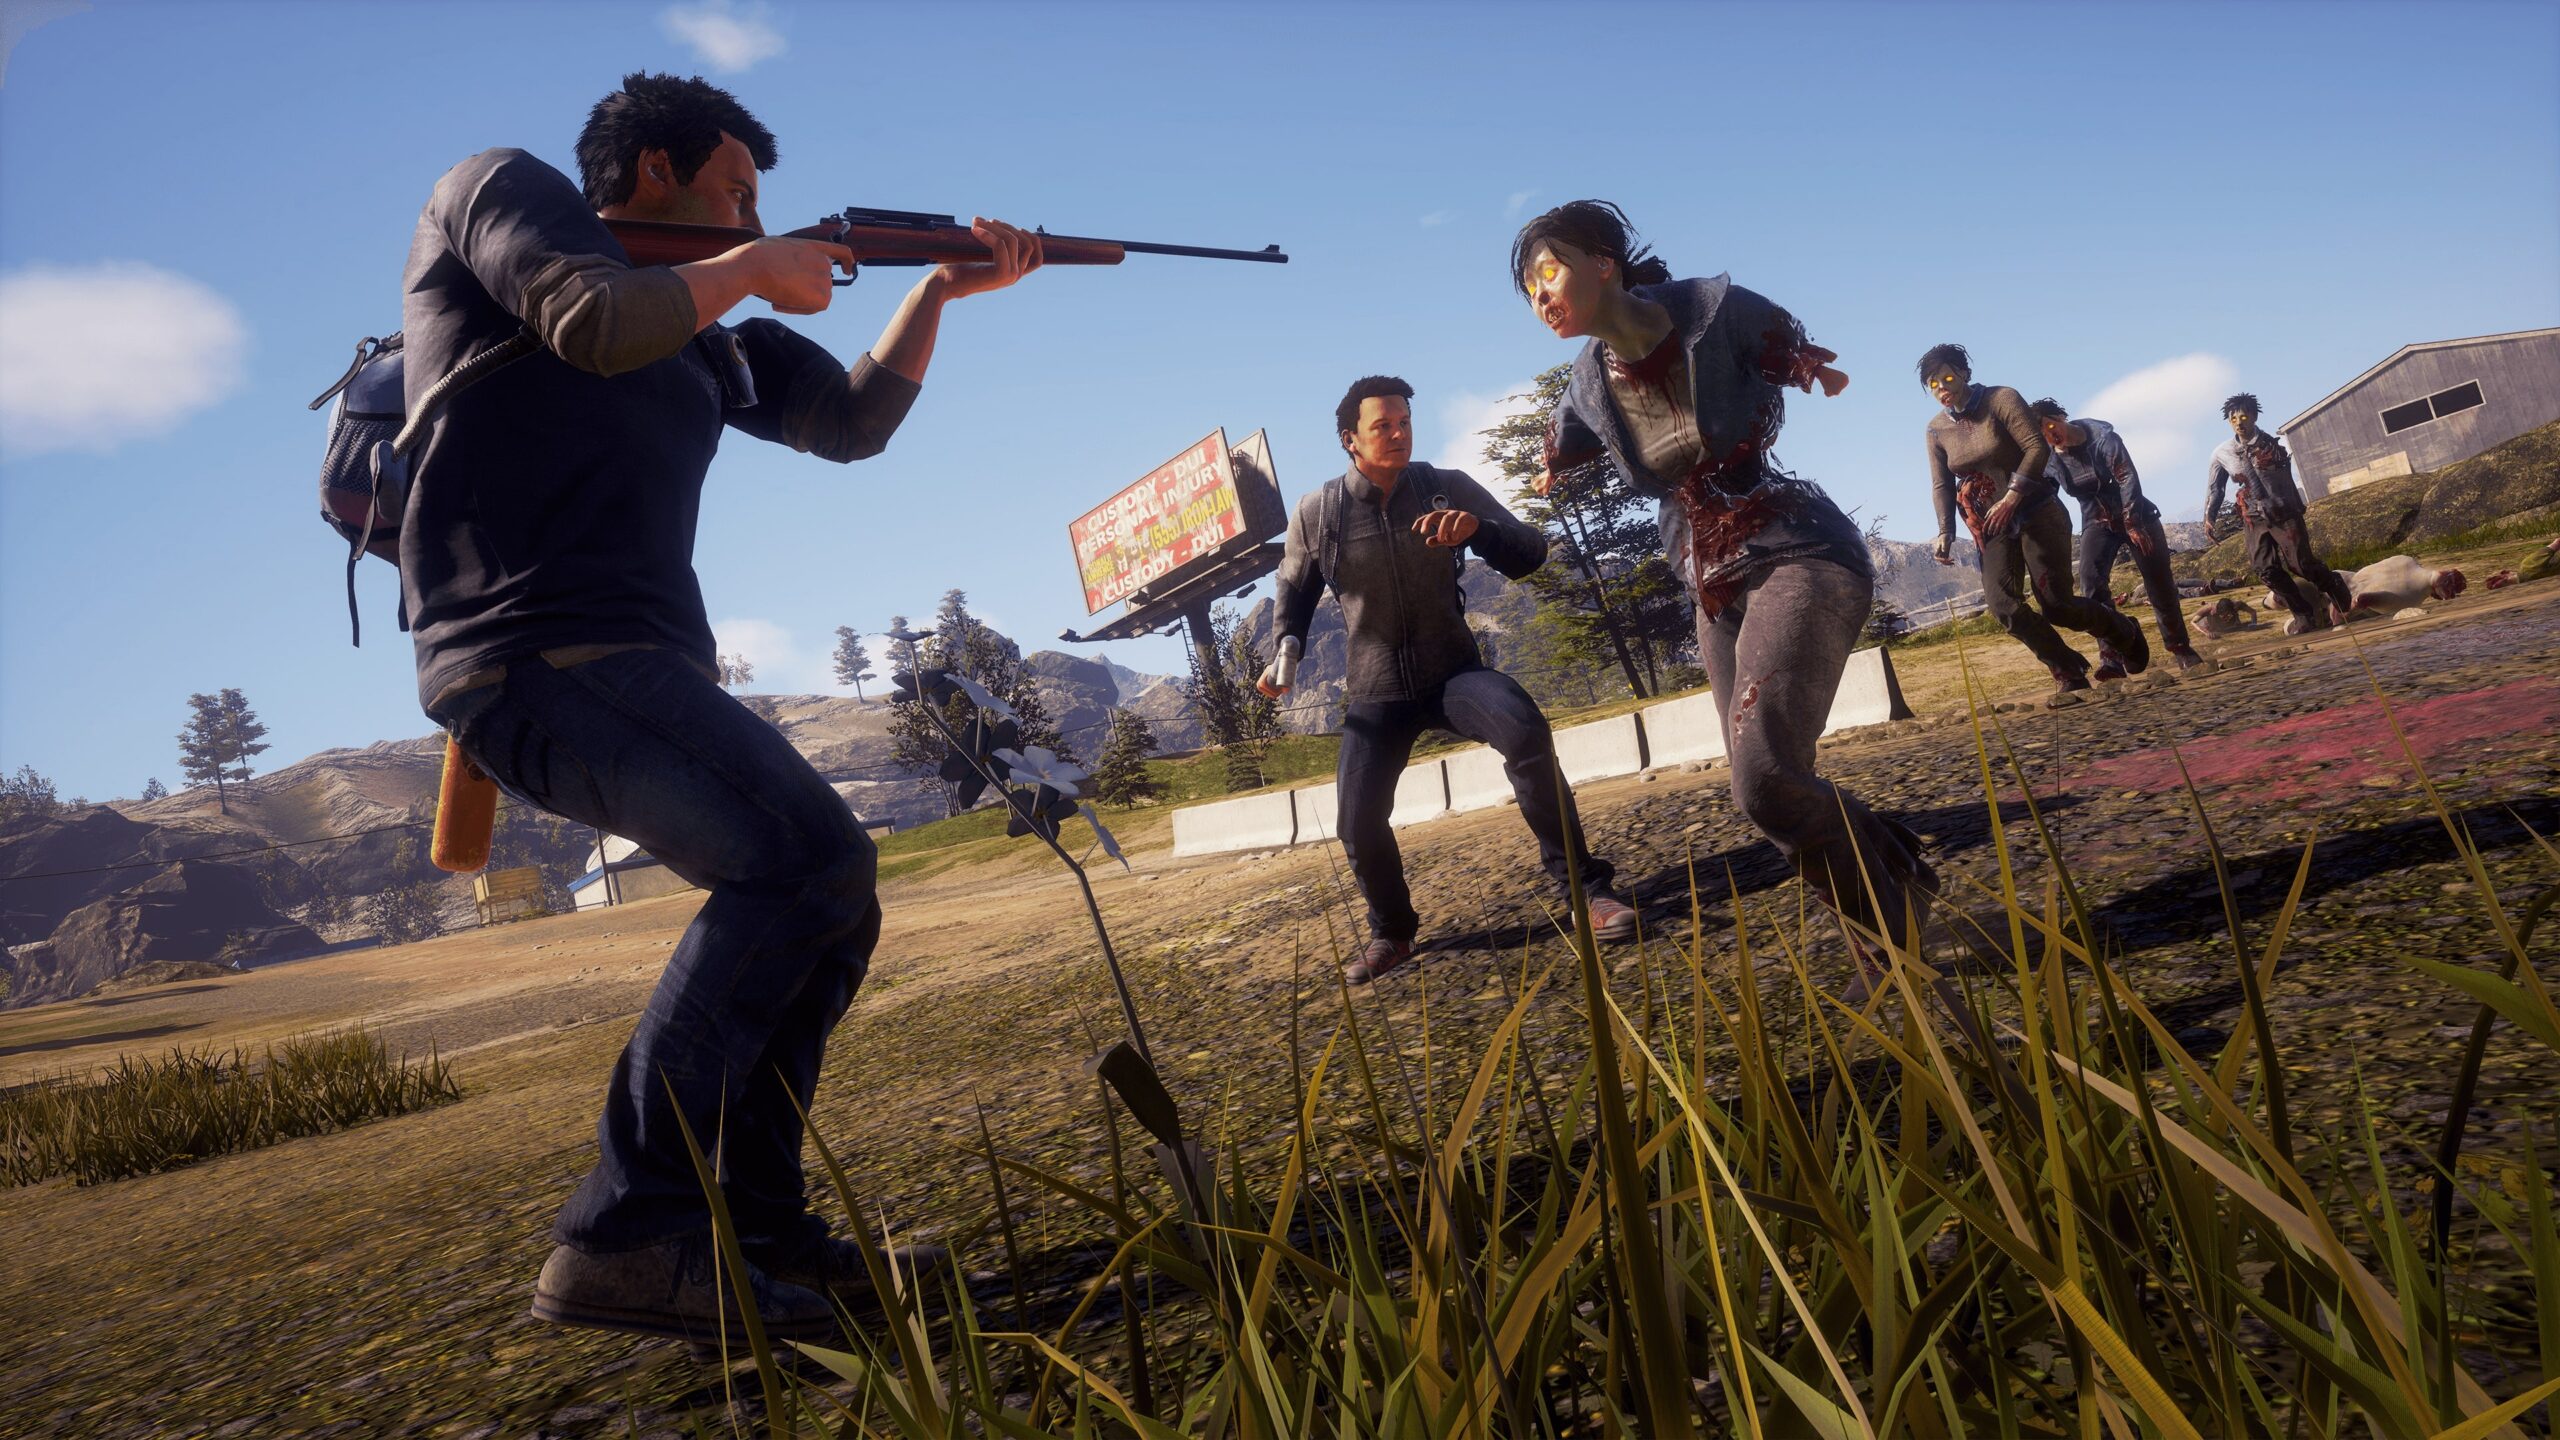 State of Decay 3: release date speculation, trailer, news, and